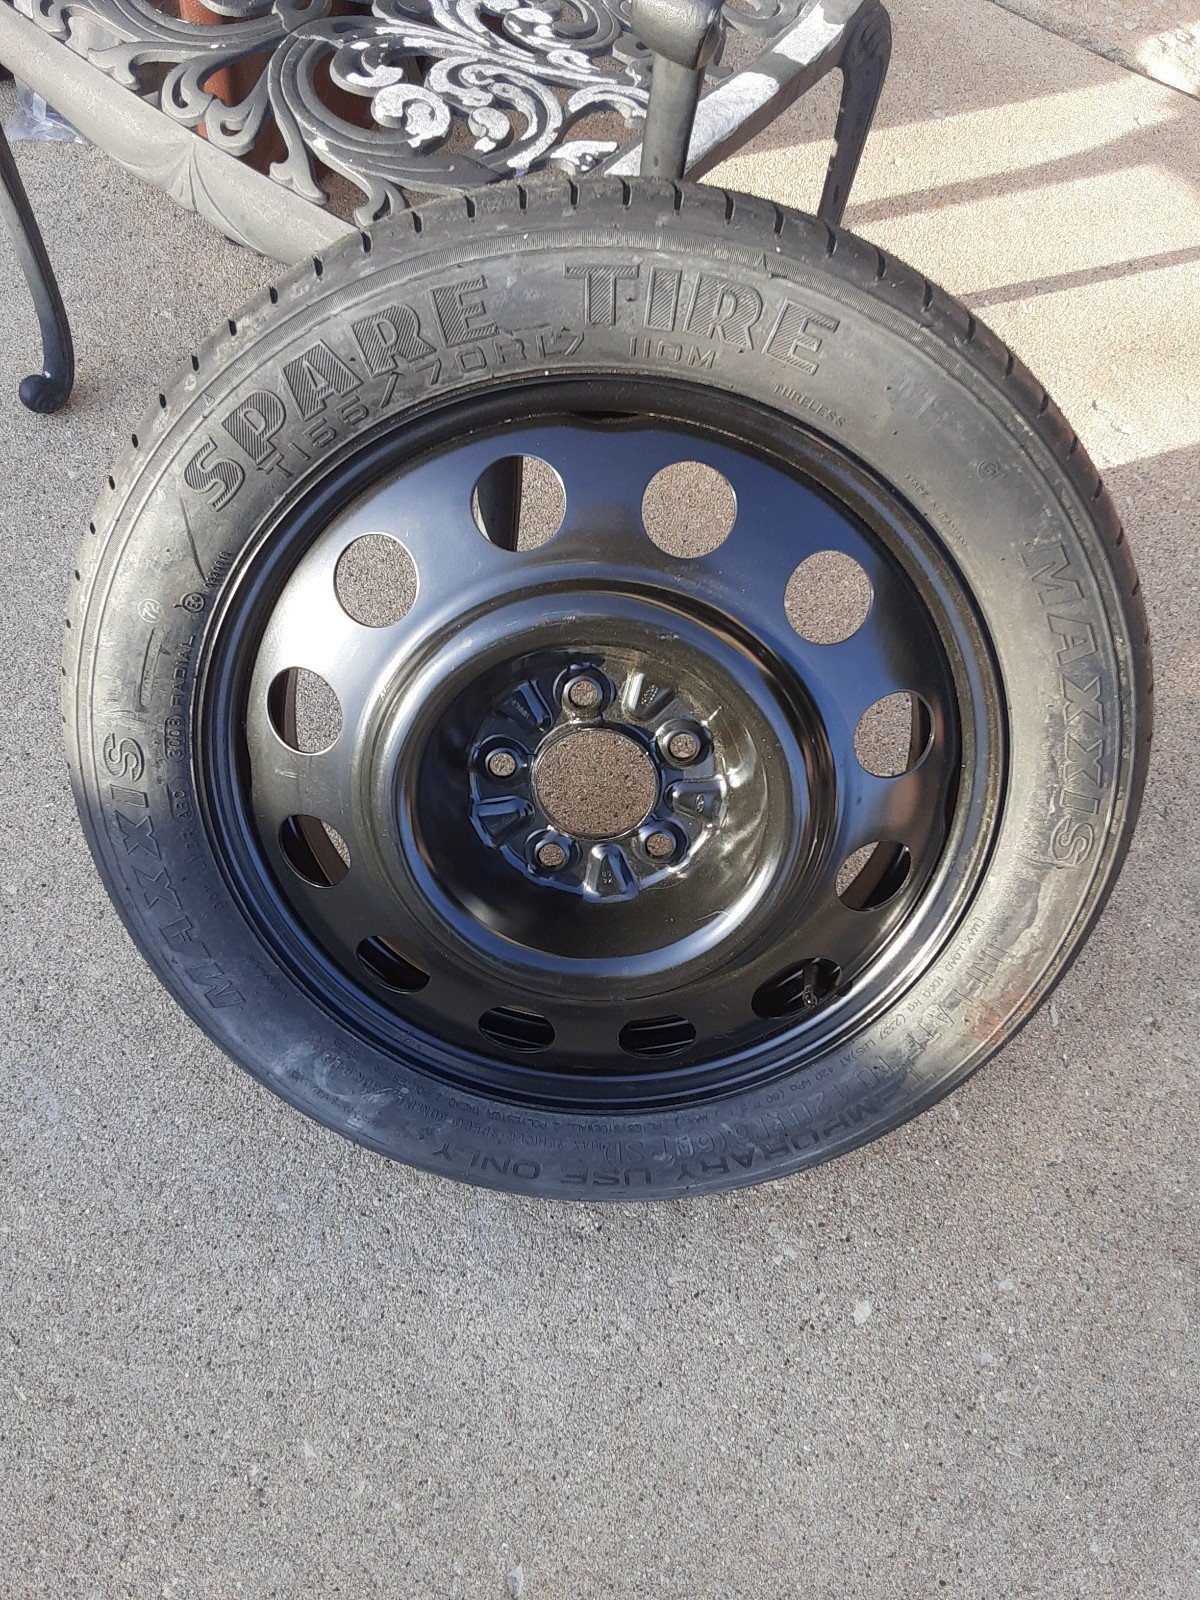 FORD MUSTANG SPARE TIRE - BRAND NEW IpFvSOriP